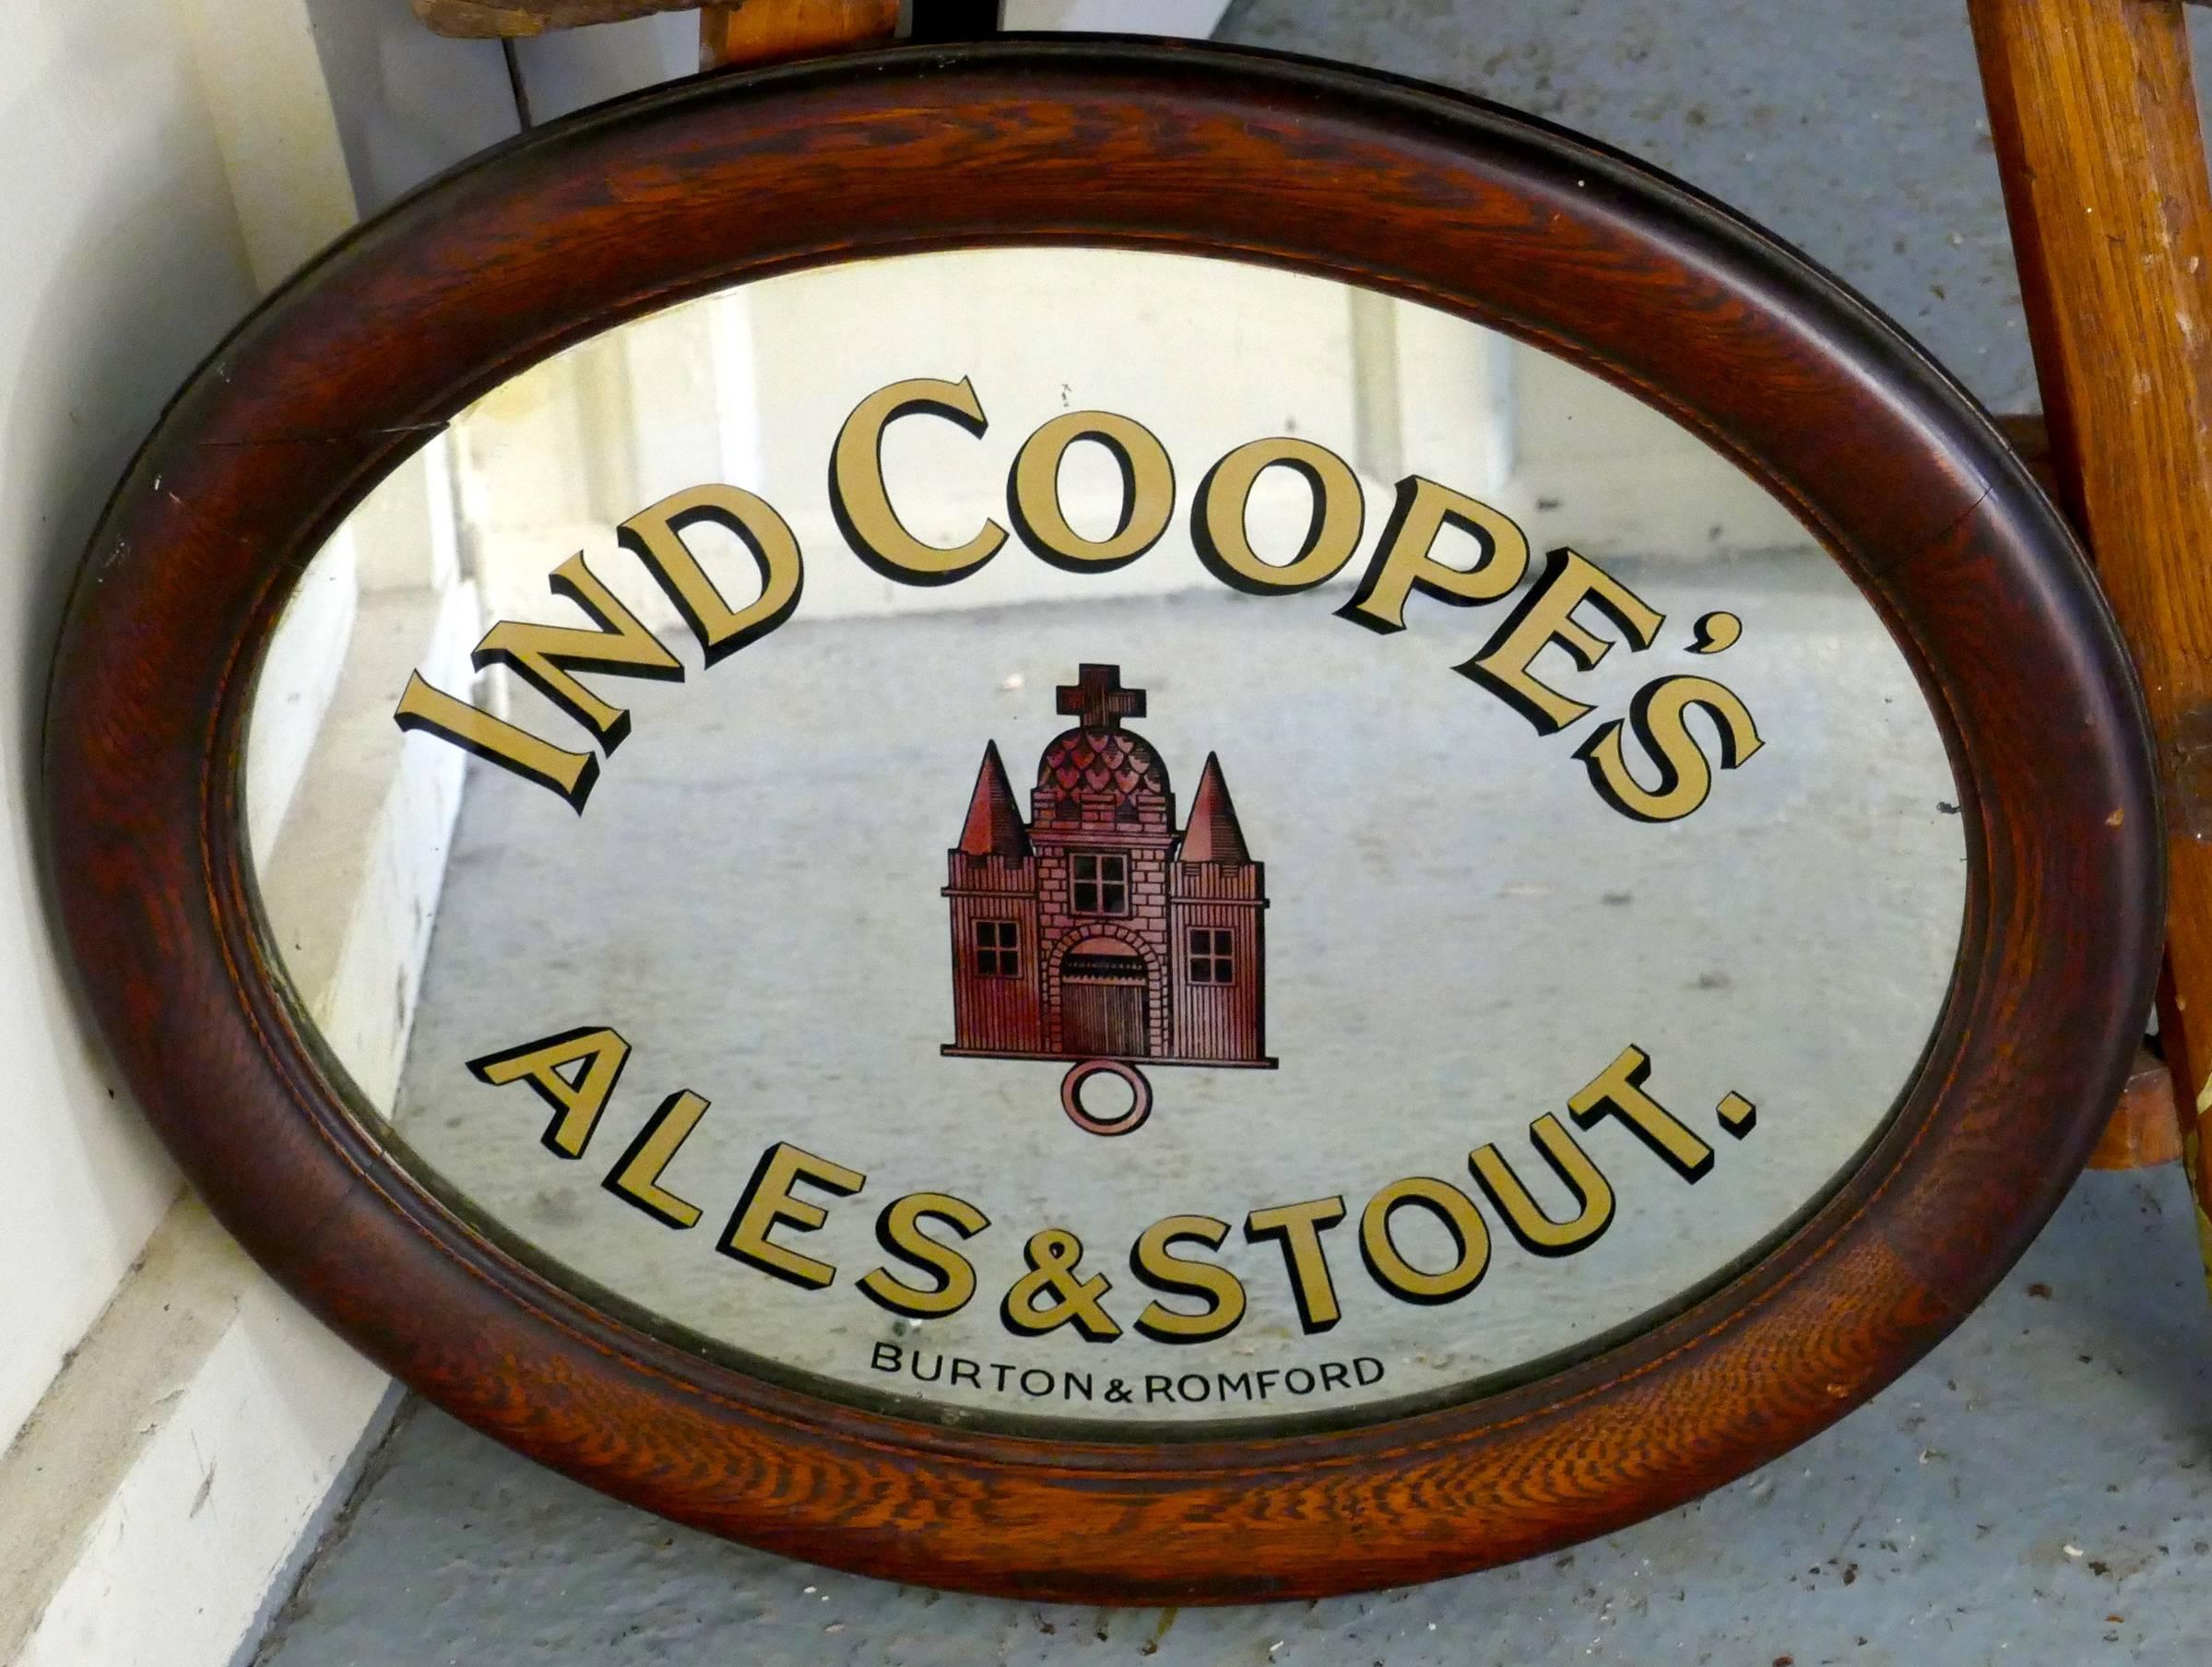 An oval advertising mirror, pub mirror for Ind Coope.

This is wonderful pictorial advertising mirror, advertising “Ind Coope’s Ales and Stout” Burton & Romford 
The mirror has a picture of the brewery in the centre and is in good original